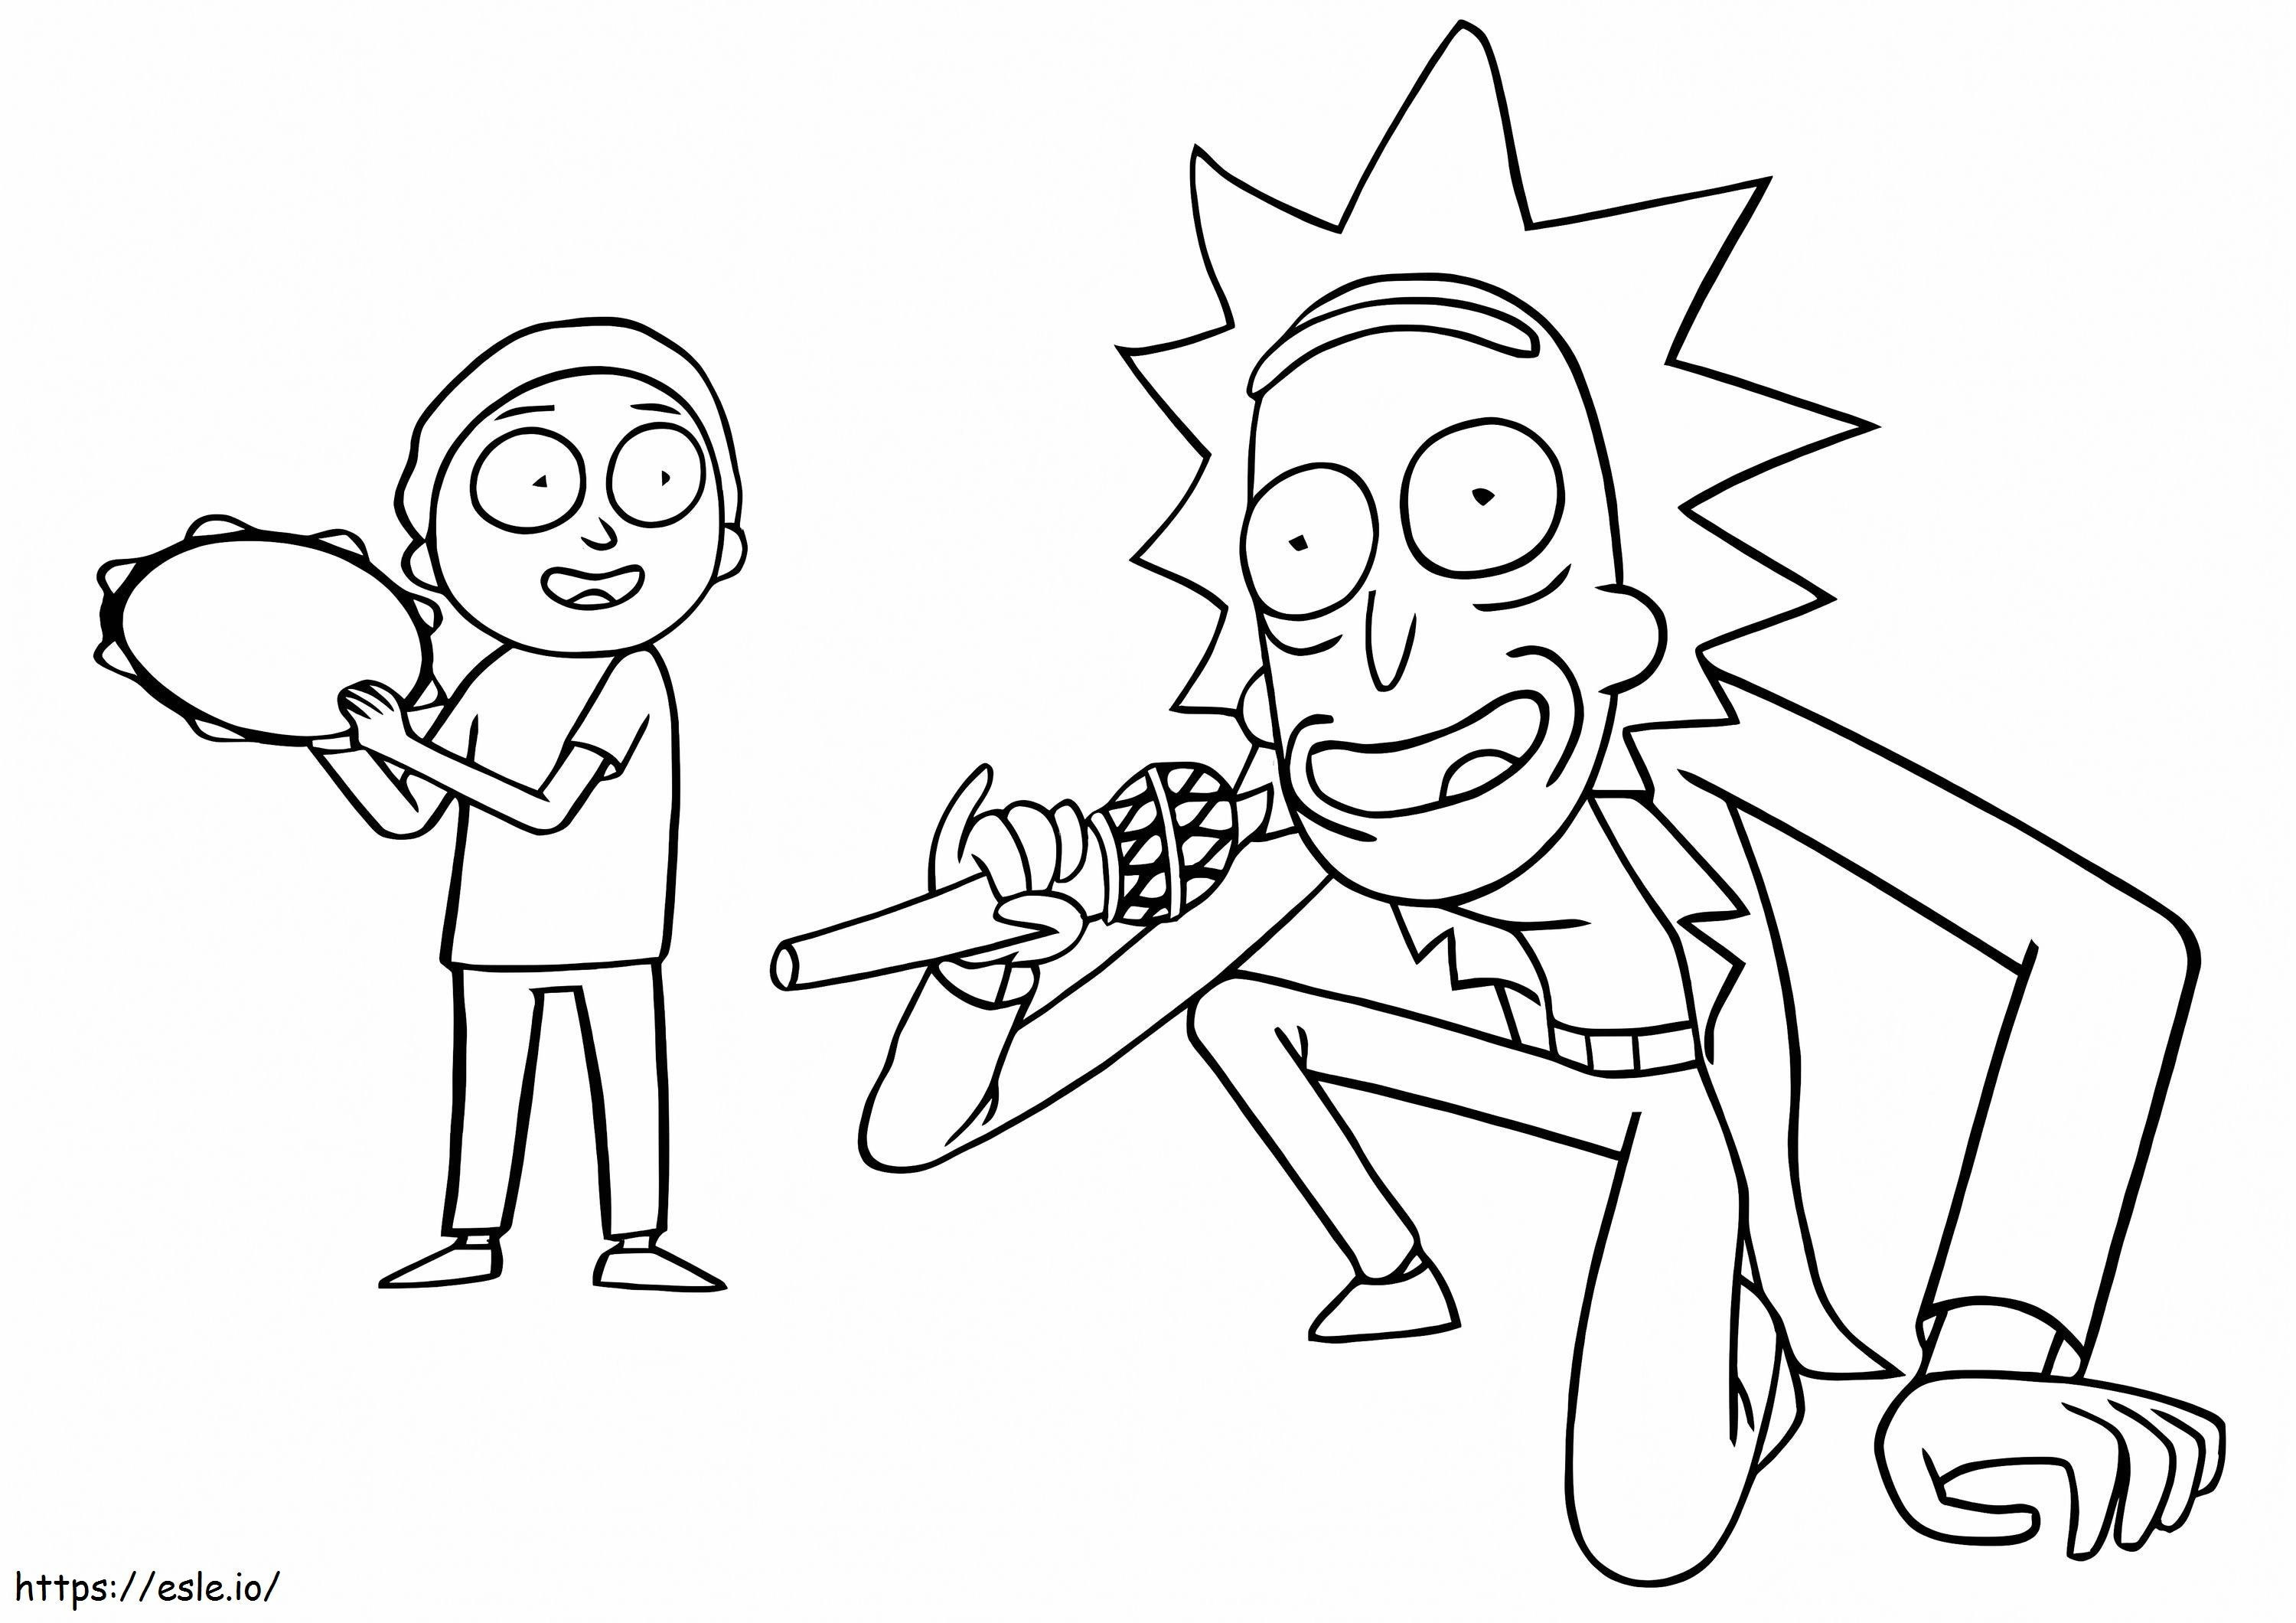 Rick Sanchez And Morty Singing coloring page